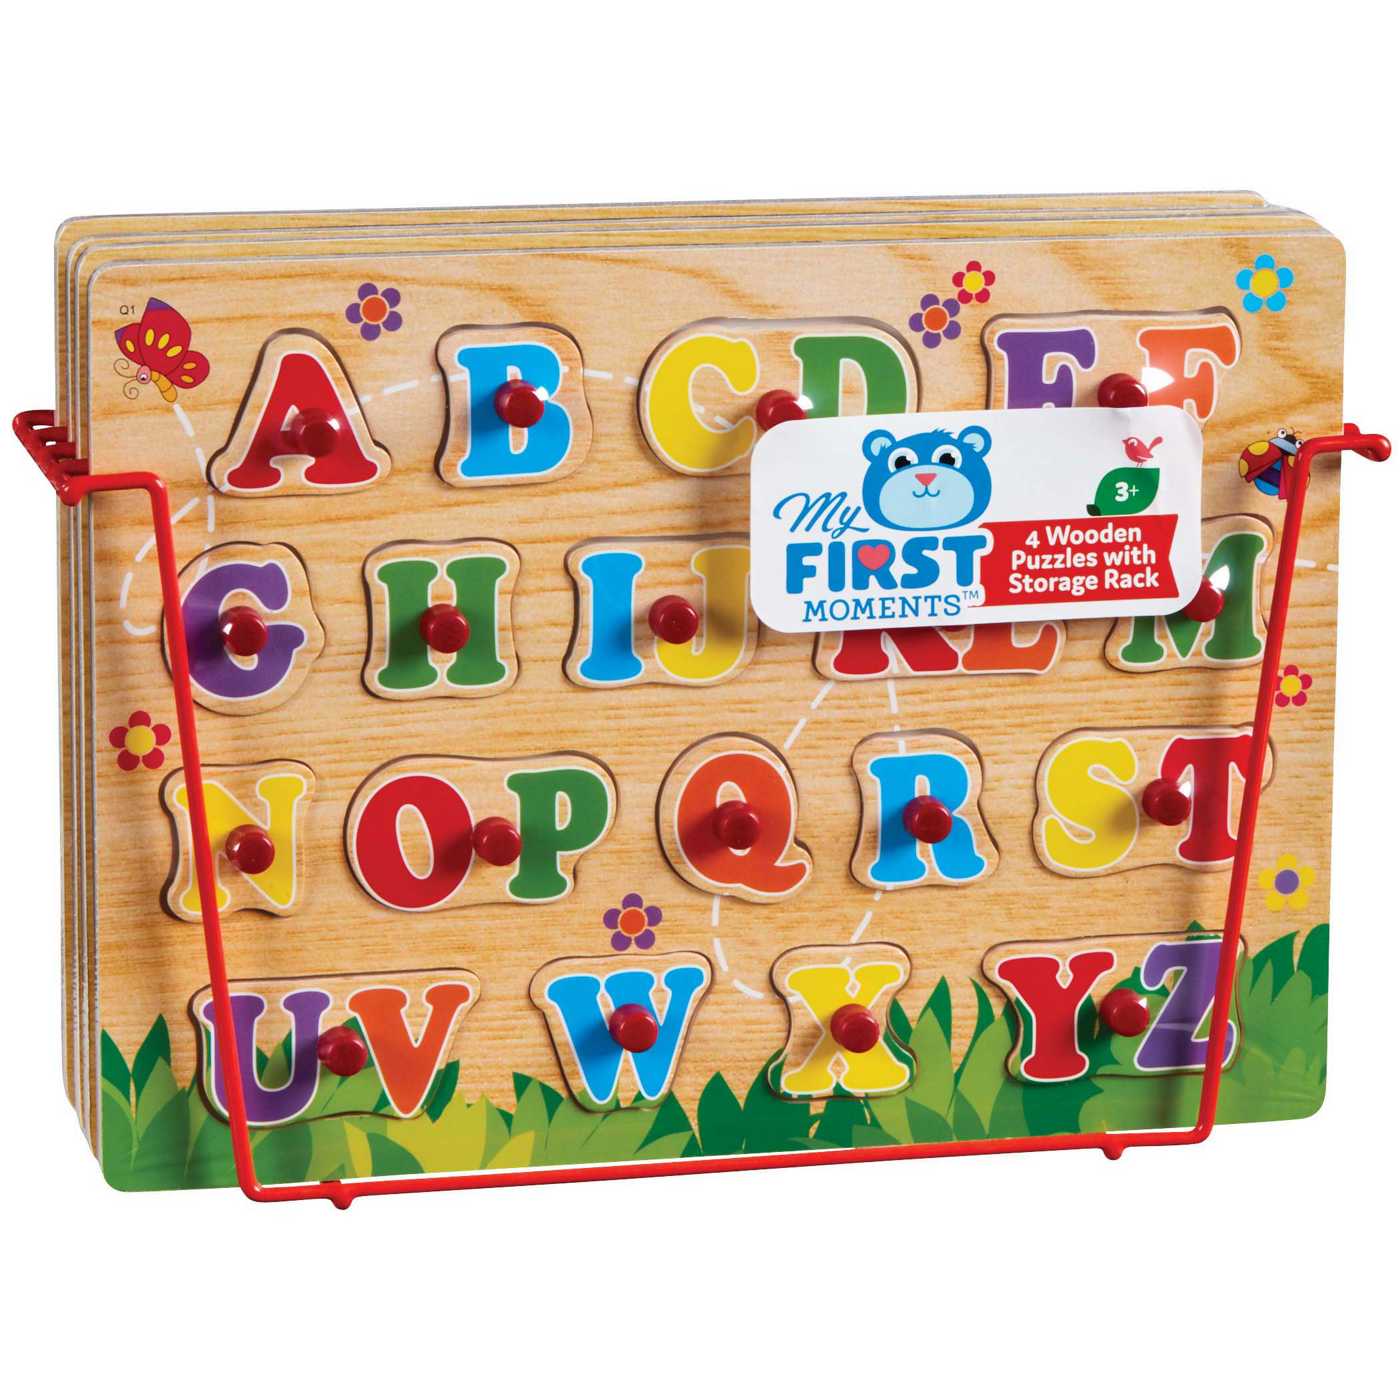 My First Moments Wooden Puzzle Set with Storage Rack - Shop Baby